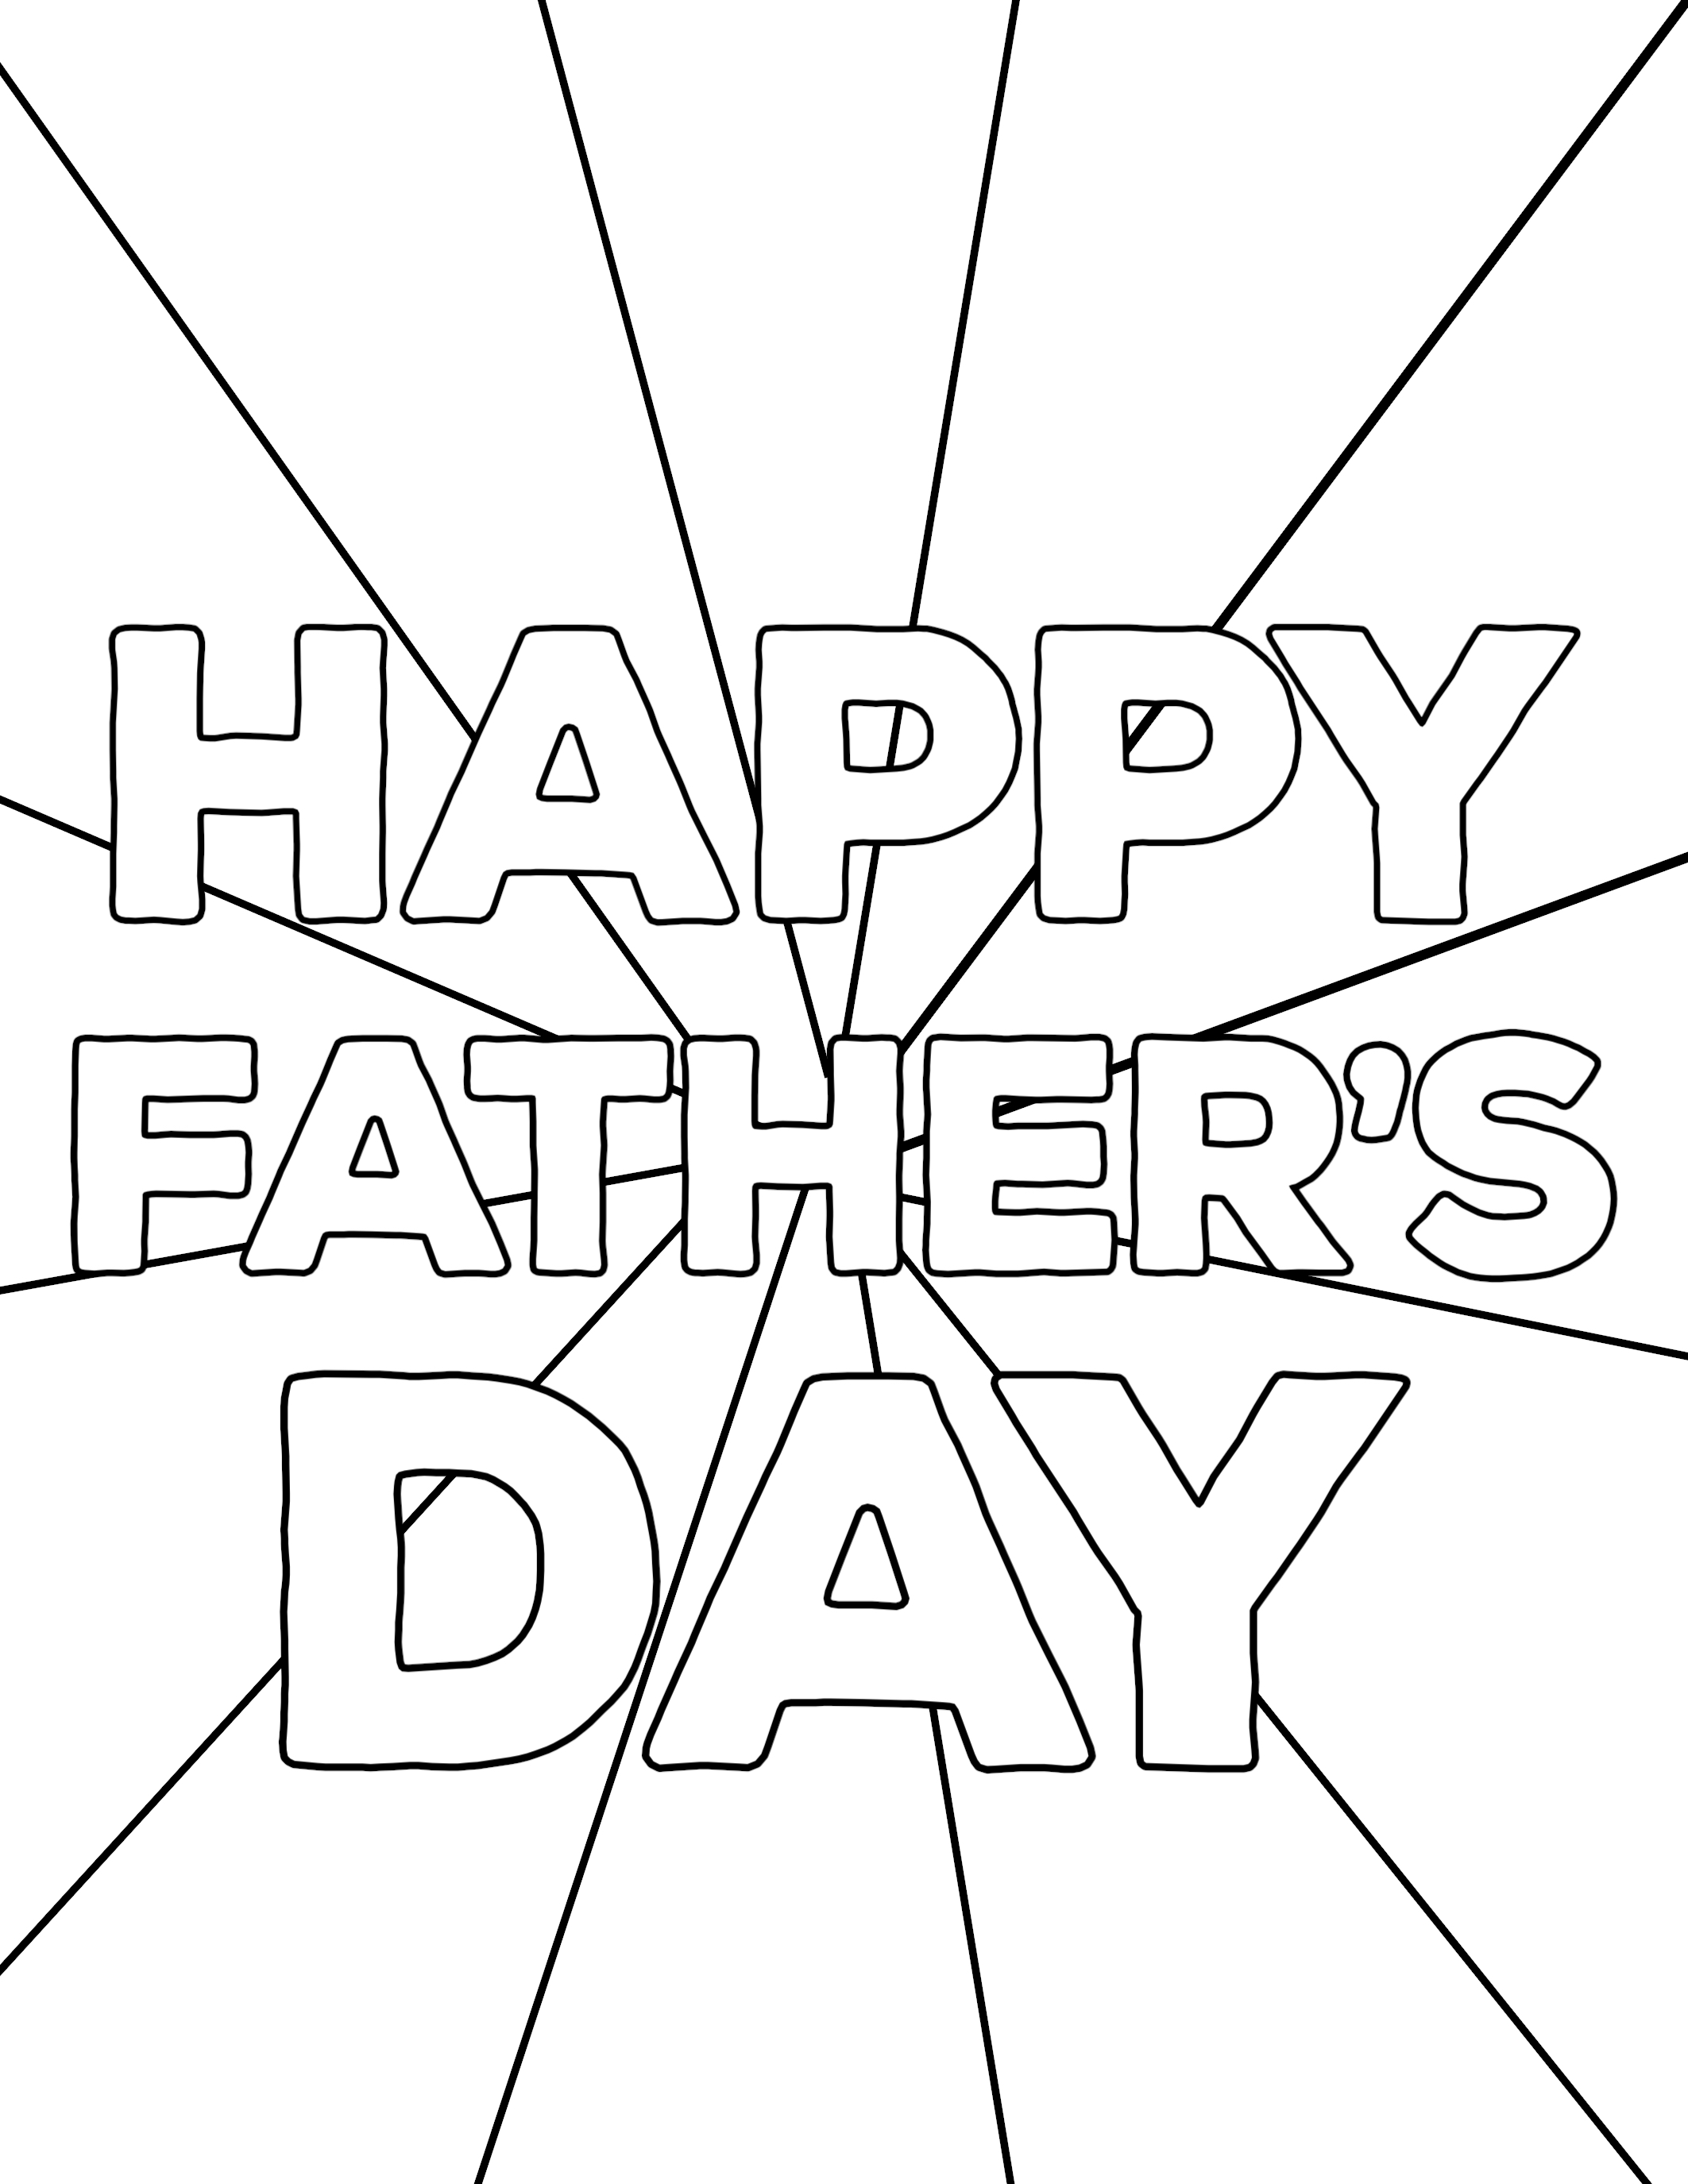 15-printable-father-s-day-coloring-pages-holiday-vault